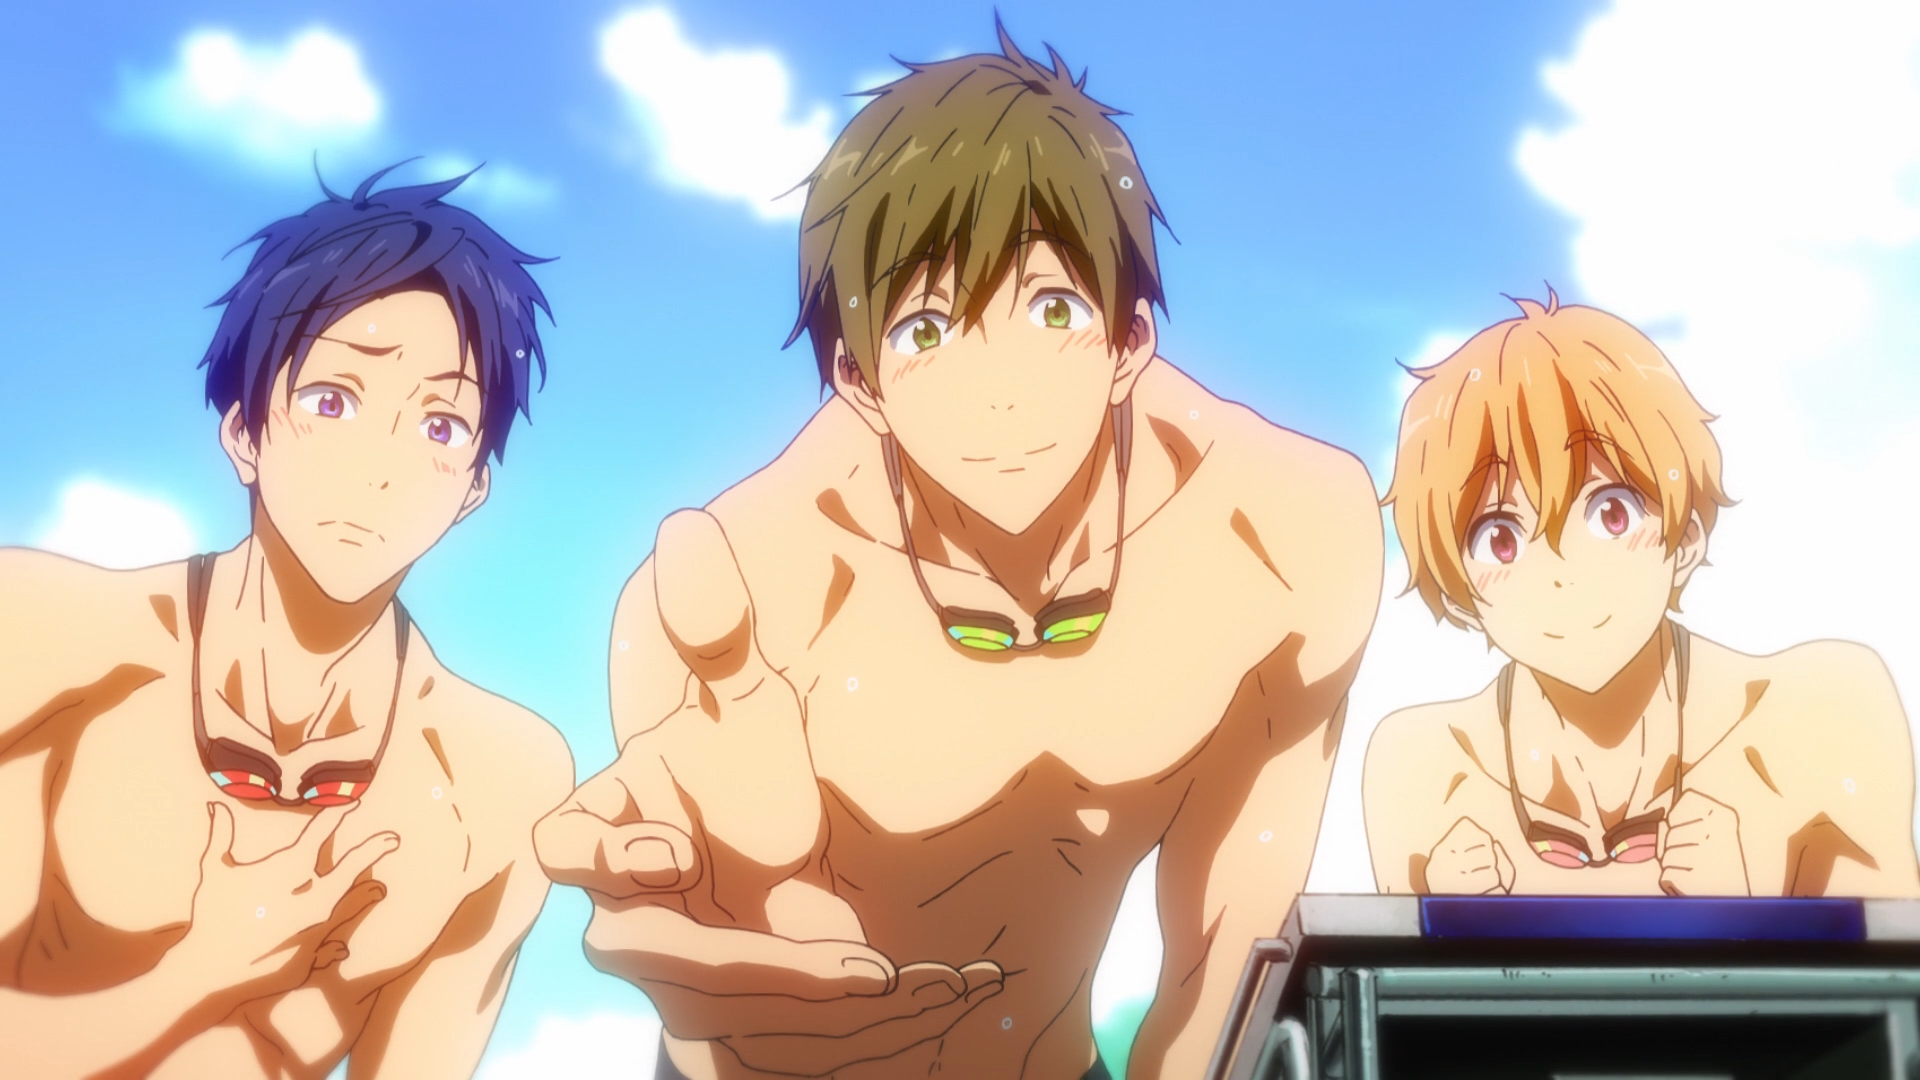 Haruka Nanase's team-mates offer him praise and a hand out of the pool in a scene from the Free! -Iwatobi Swim Club TV Anime.